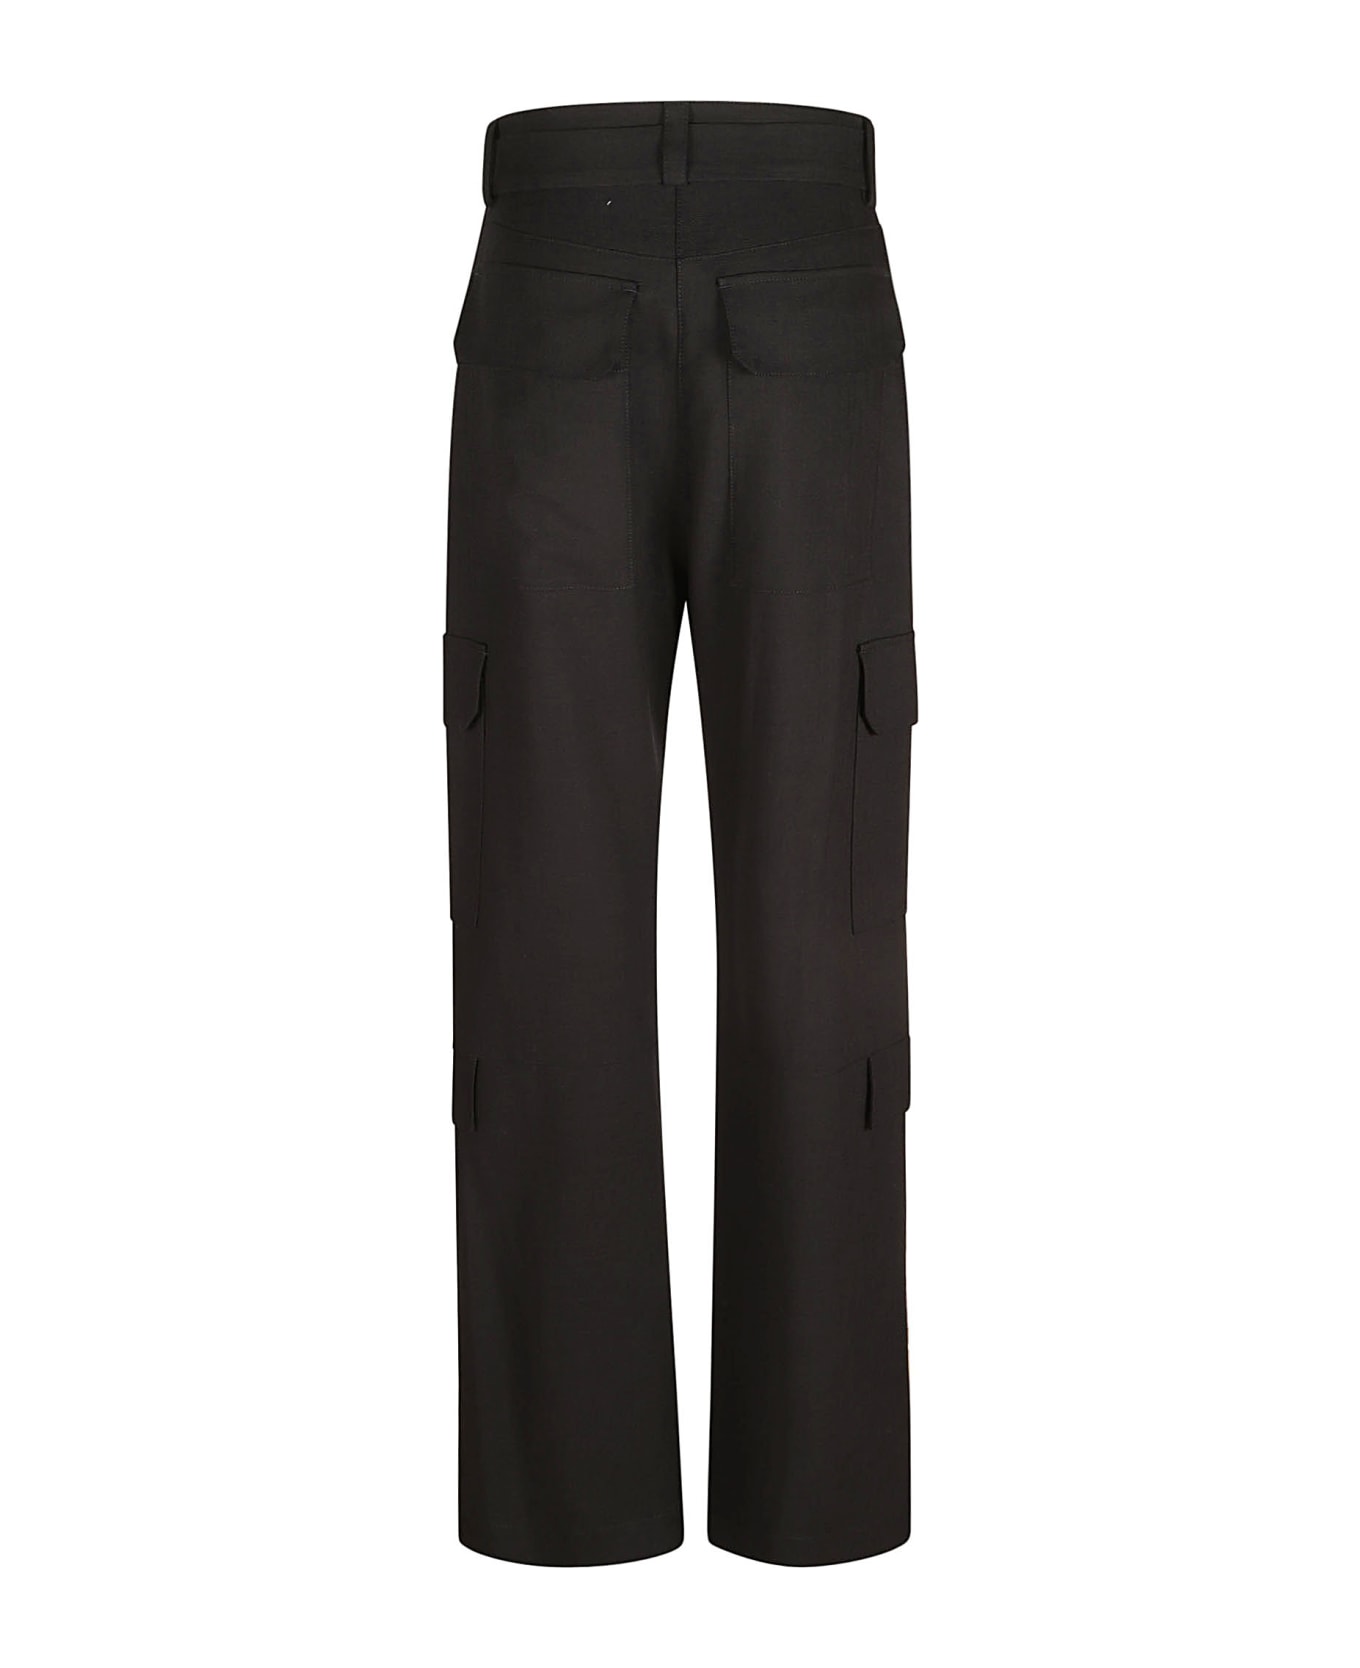 MSGM Belted Cargo Trousers - Black ボトムス